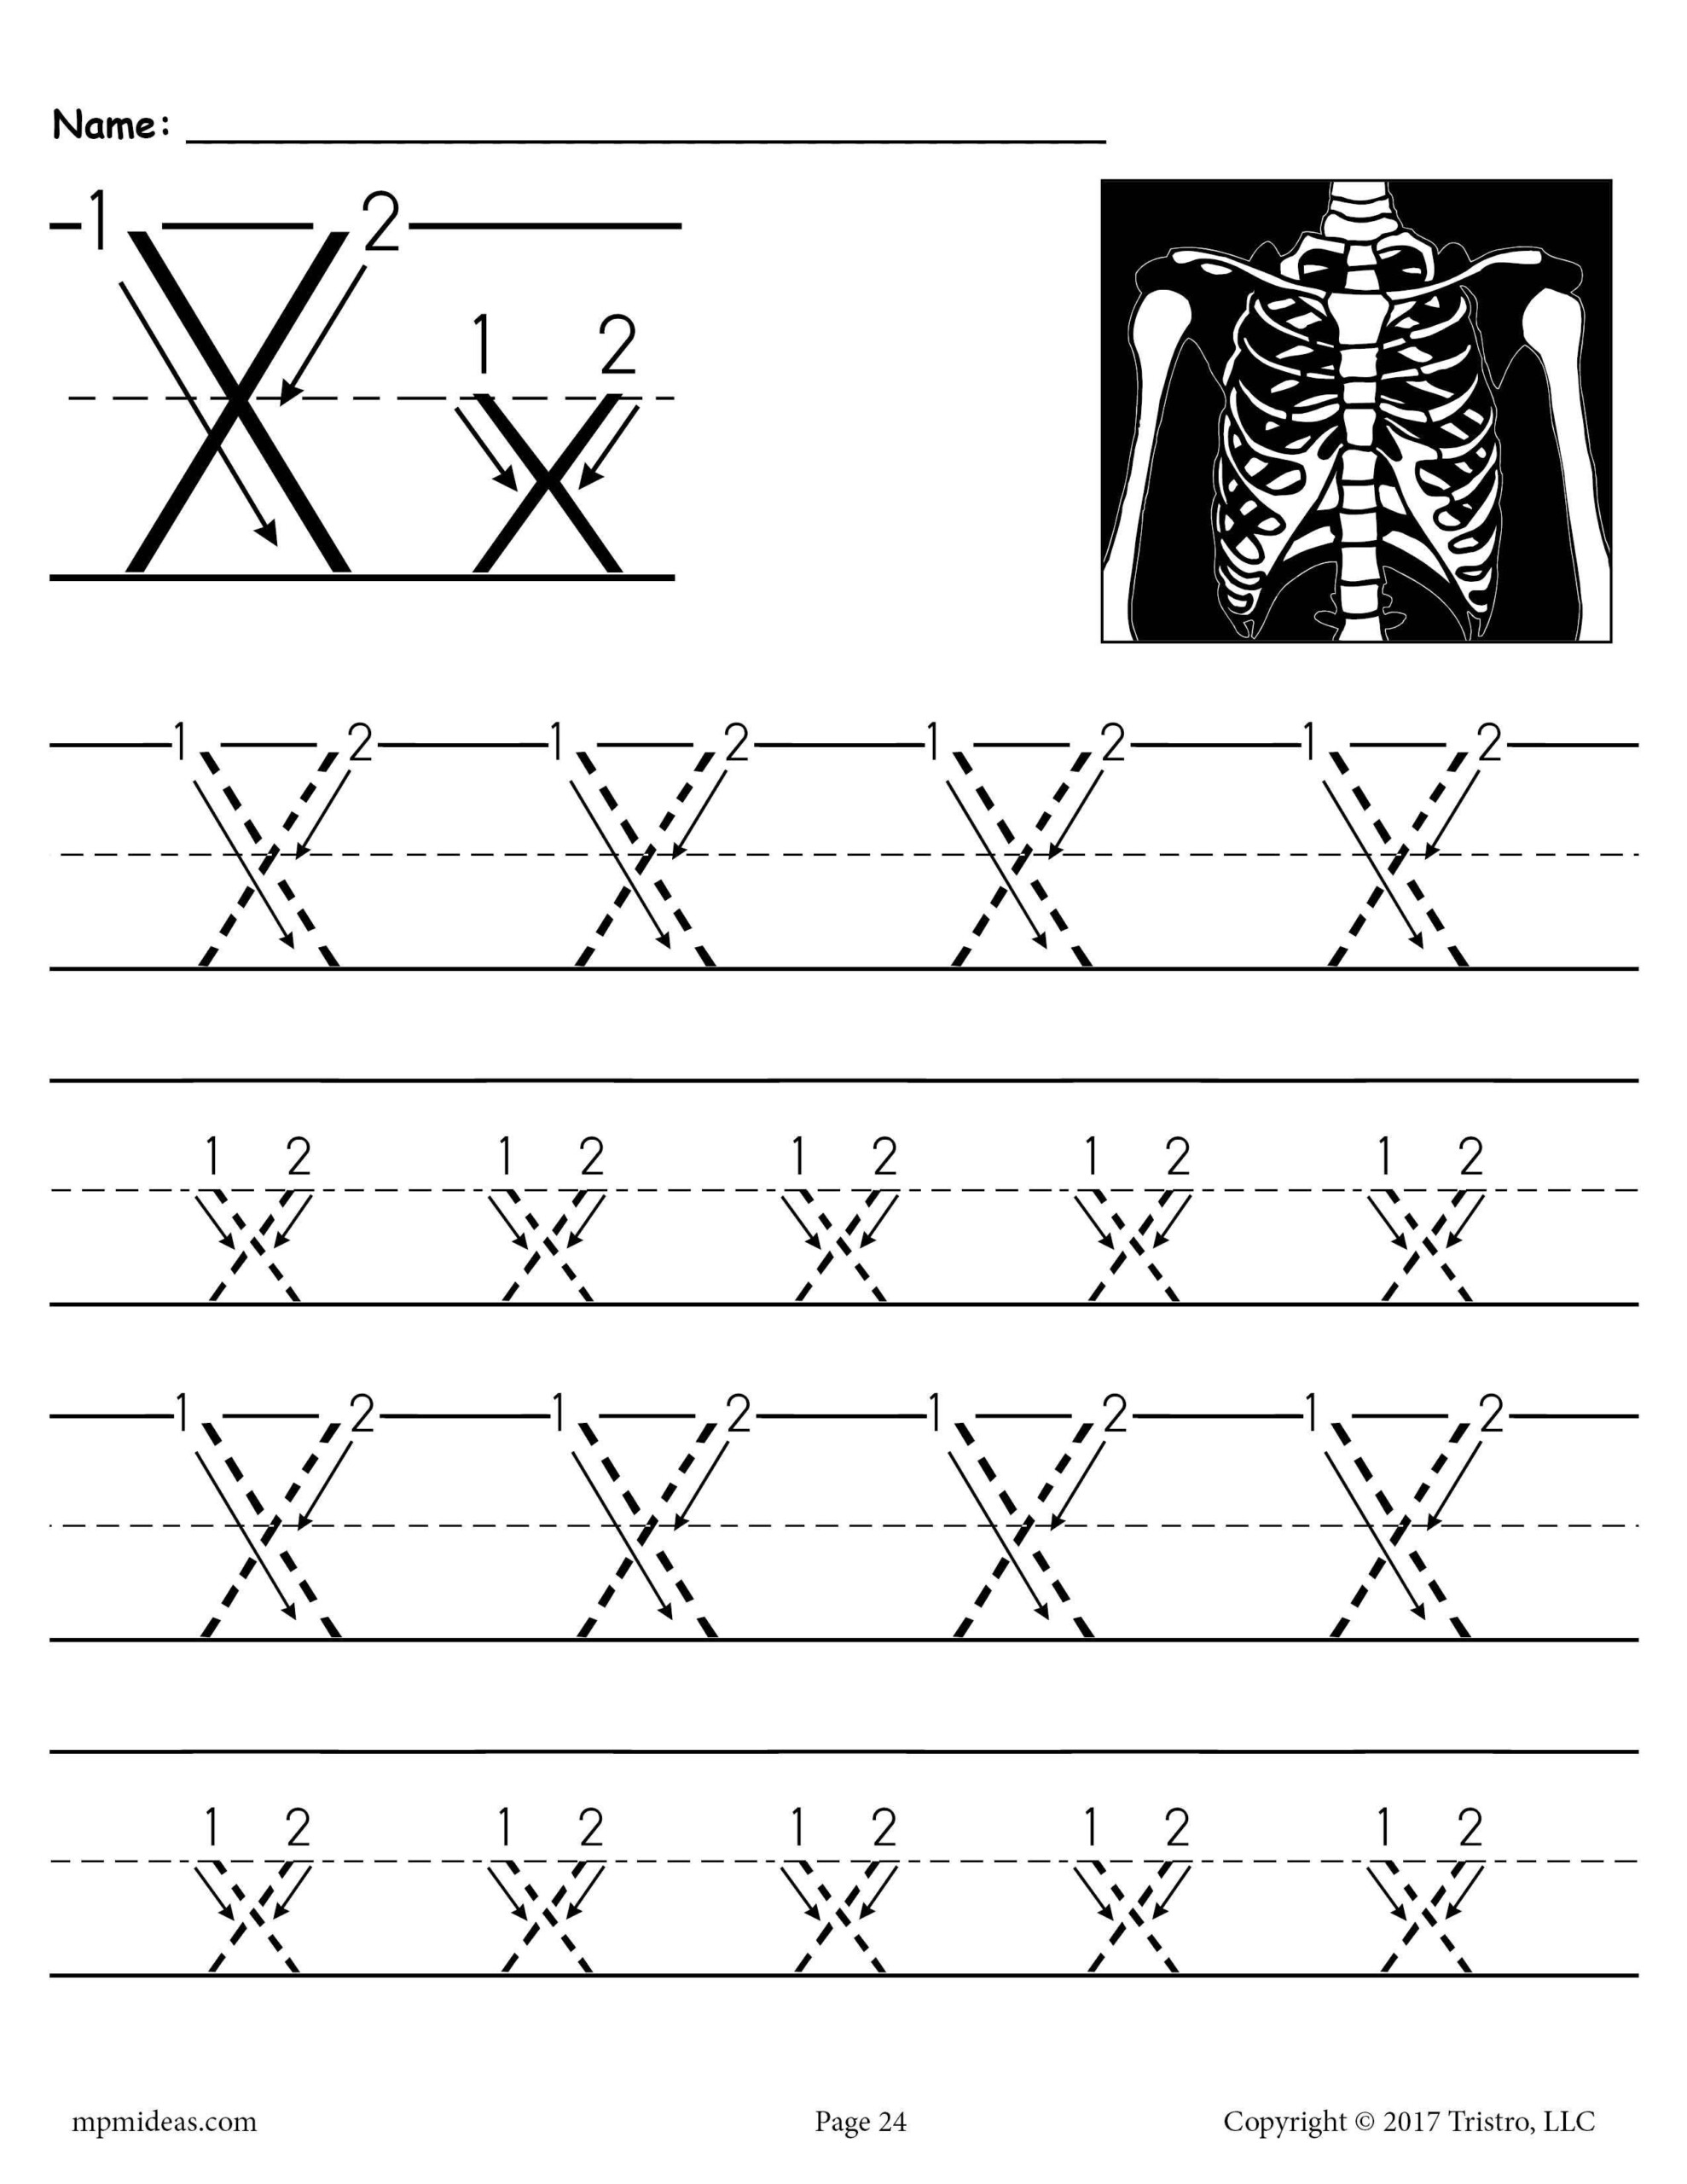 FREE Printable Letter X Tracing Worksheet With Number And Arrow Guides